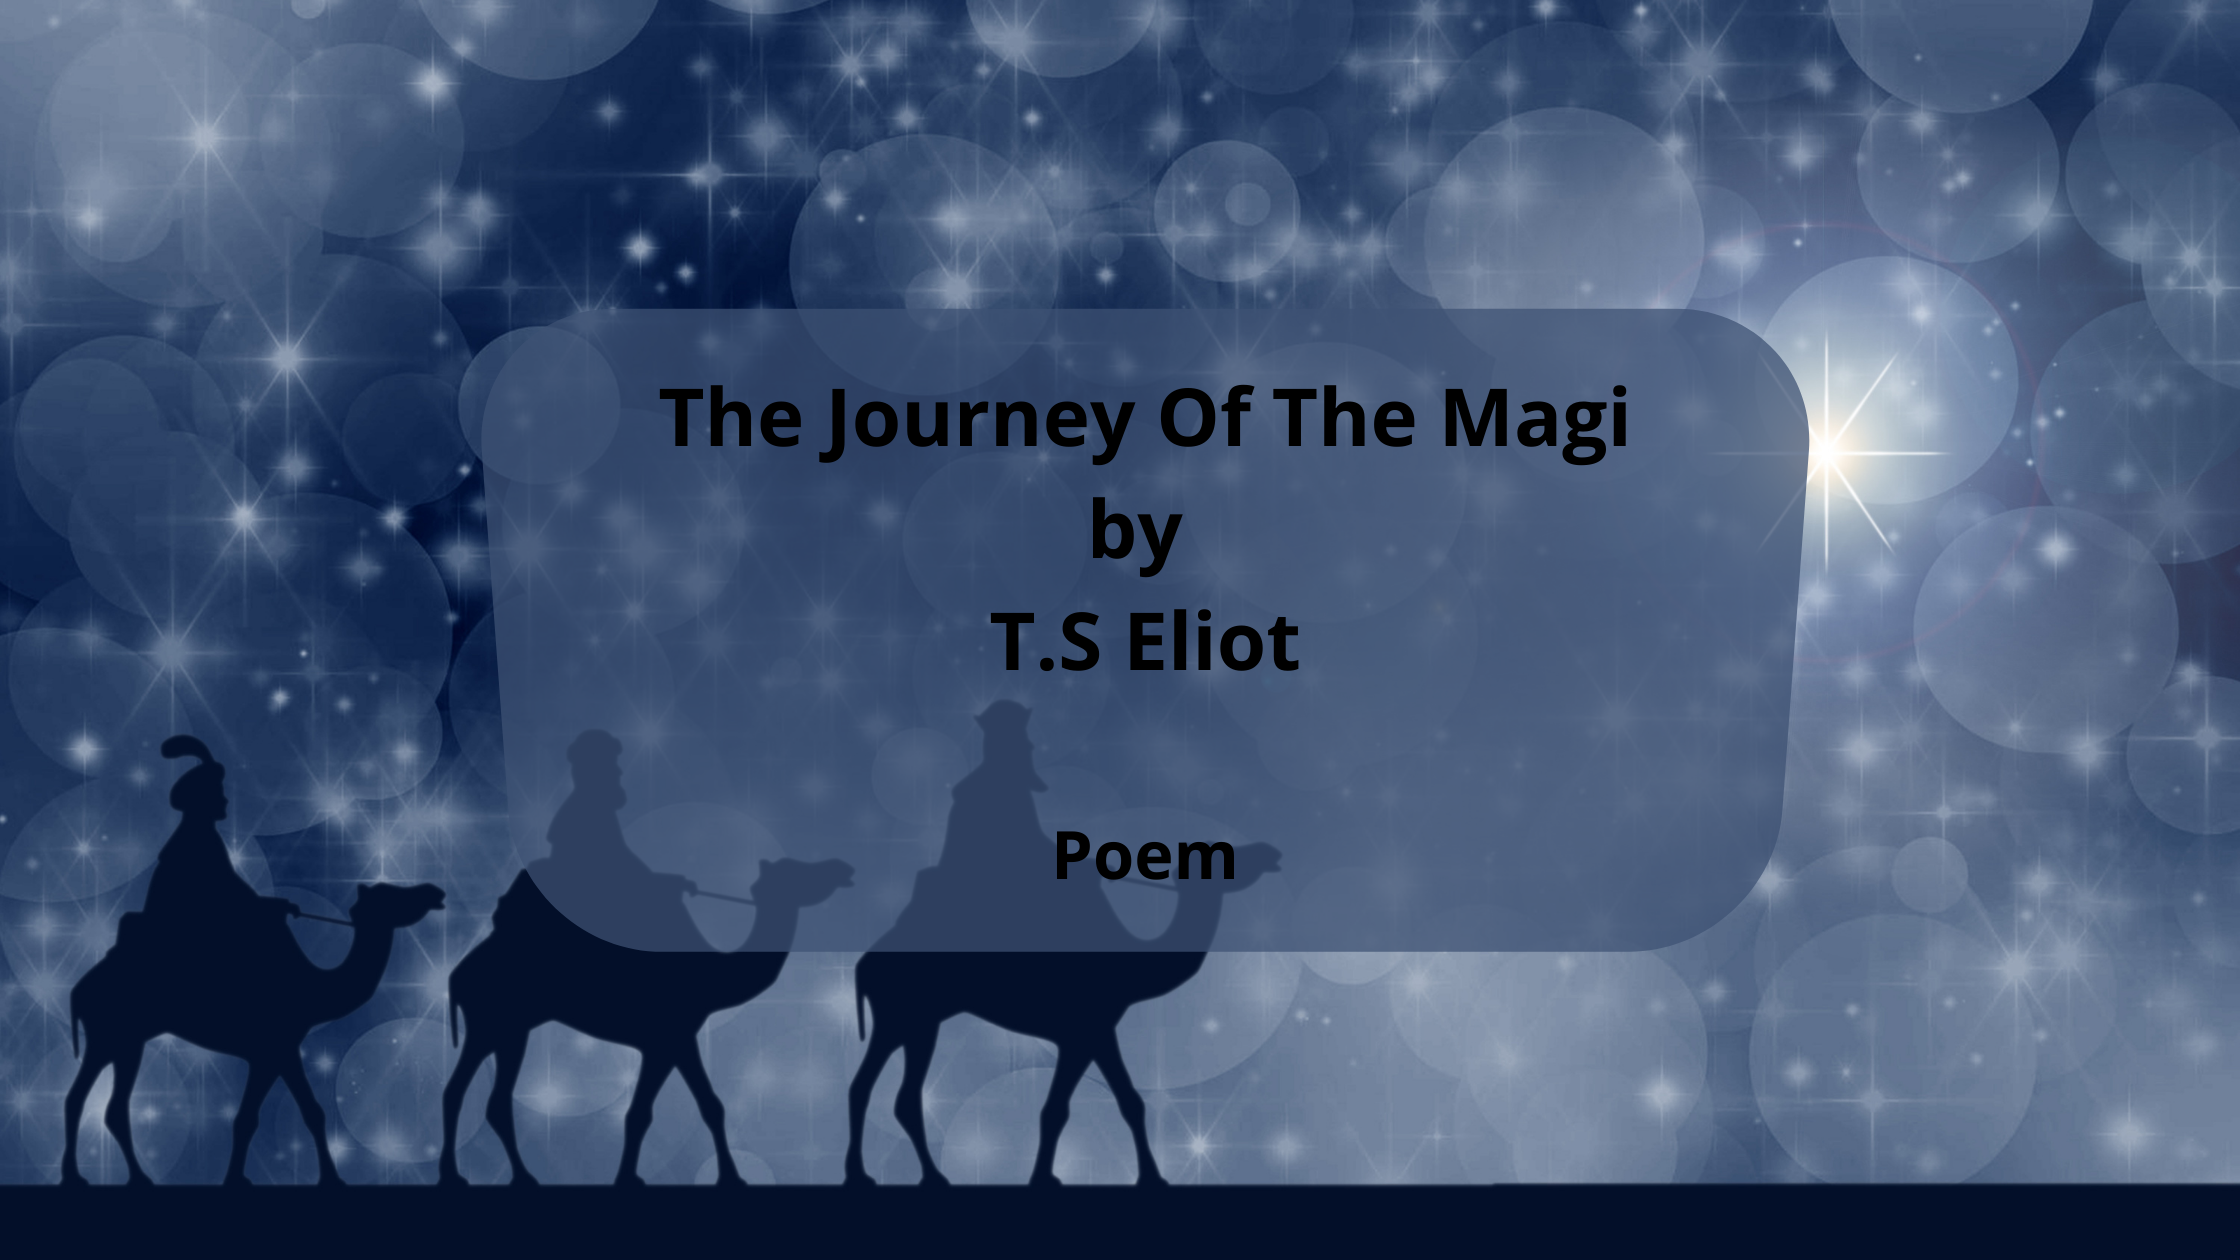 The Journey Of The Magi Poem by T.S Eliot